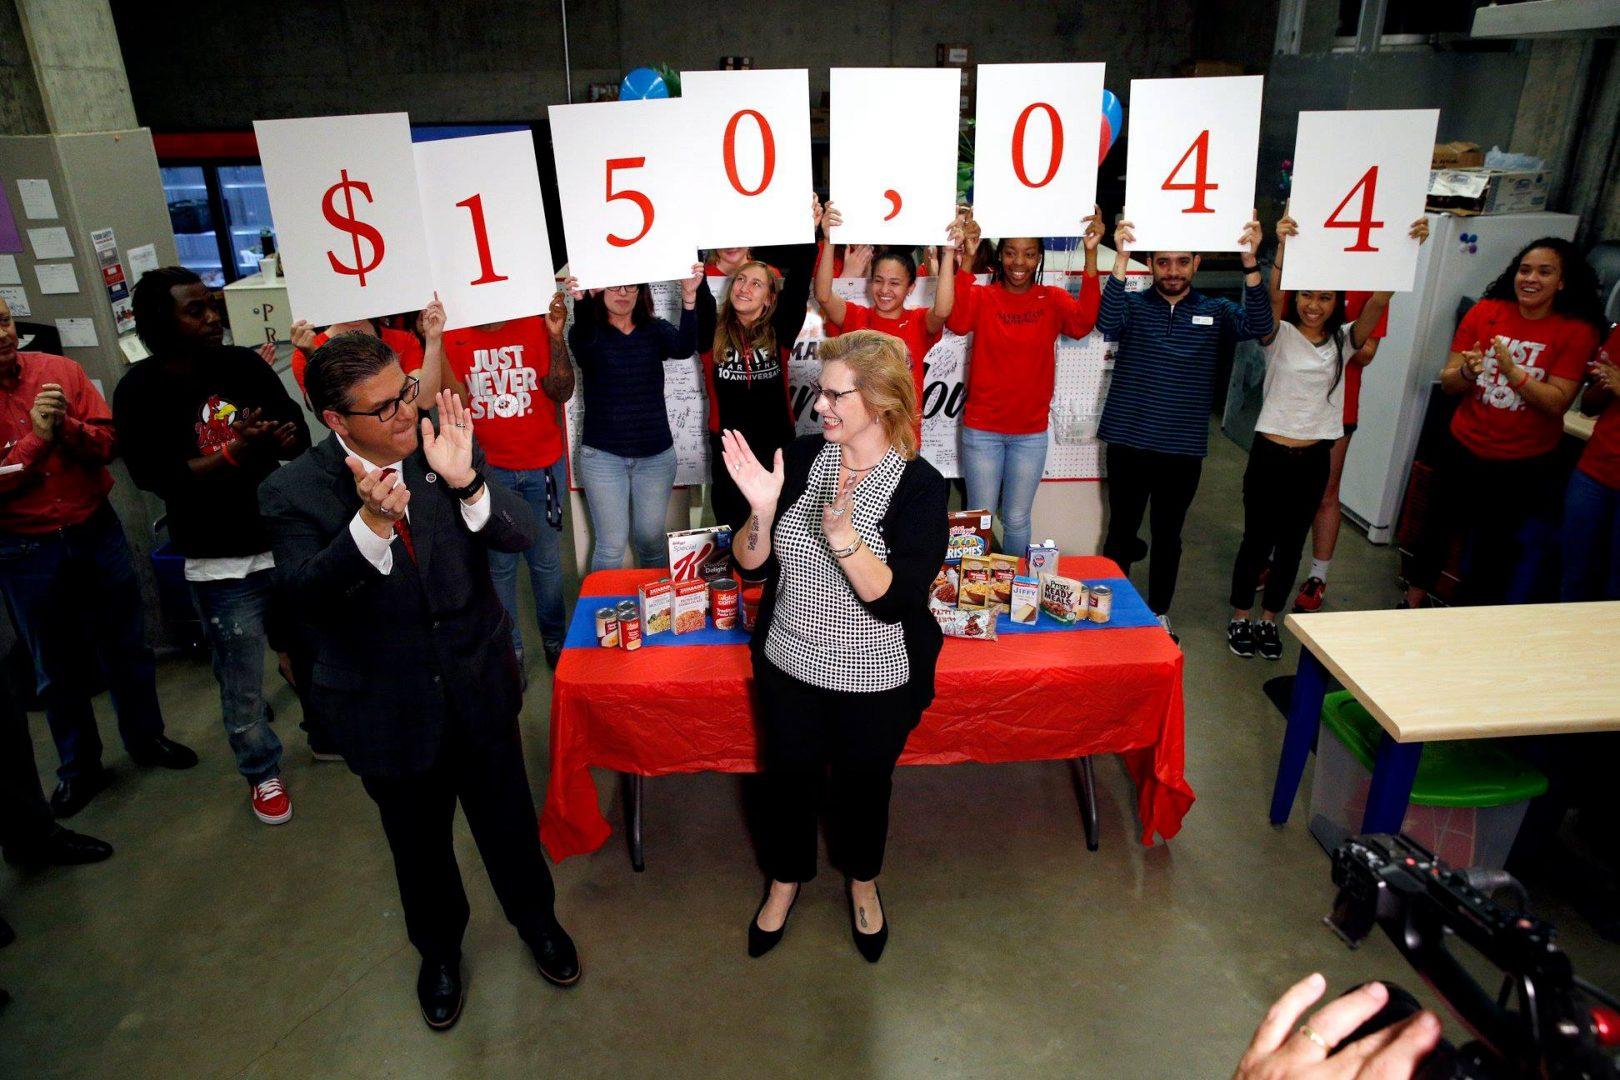 Fresno State President Dr. Joseph I. Castro and Mary announce the donation total for the Student cupboard from 2018 March Match Up fundraiser. (Carey Edmunson/ Courtesy Student Cupboard)